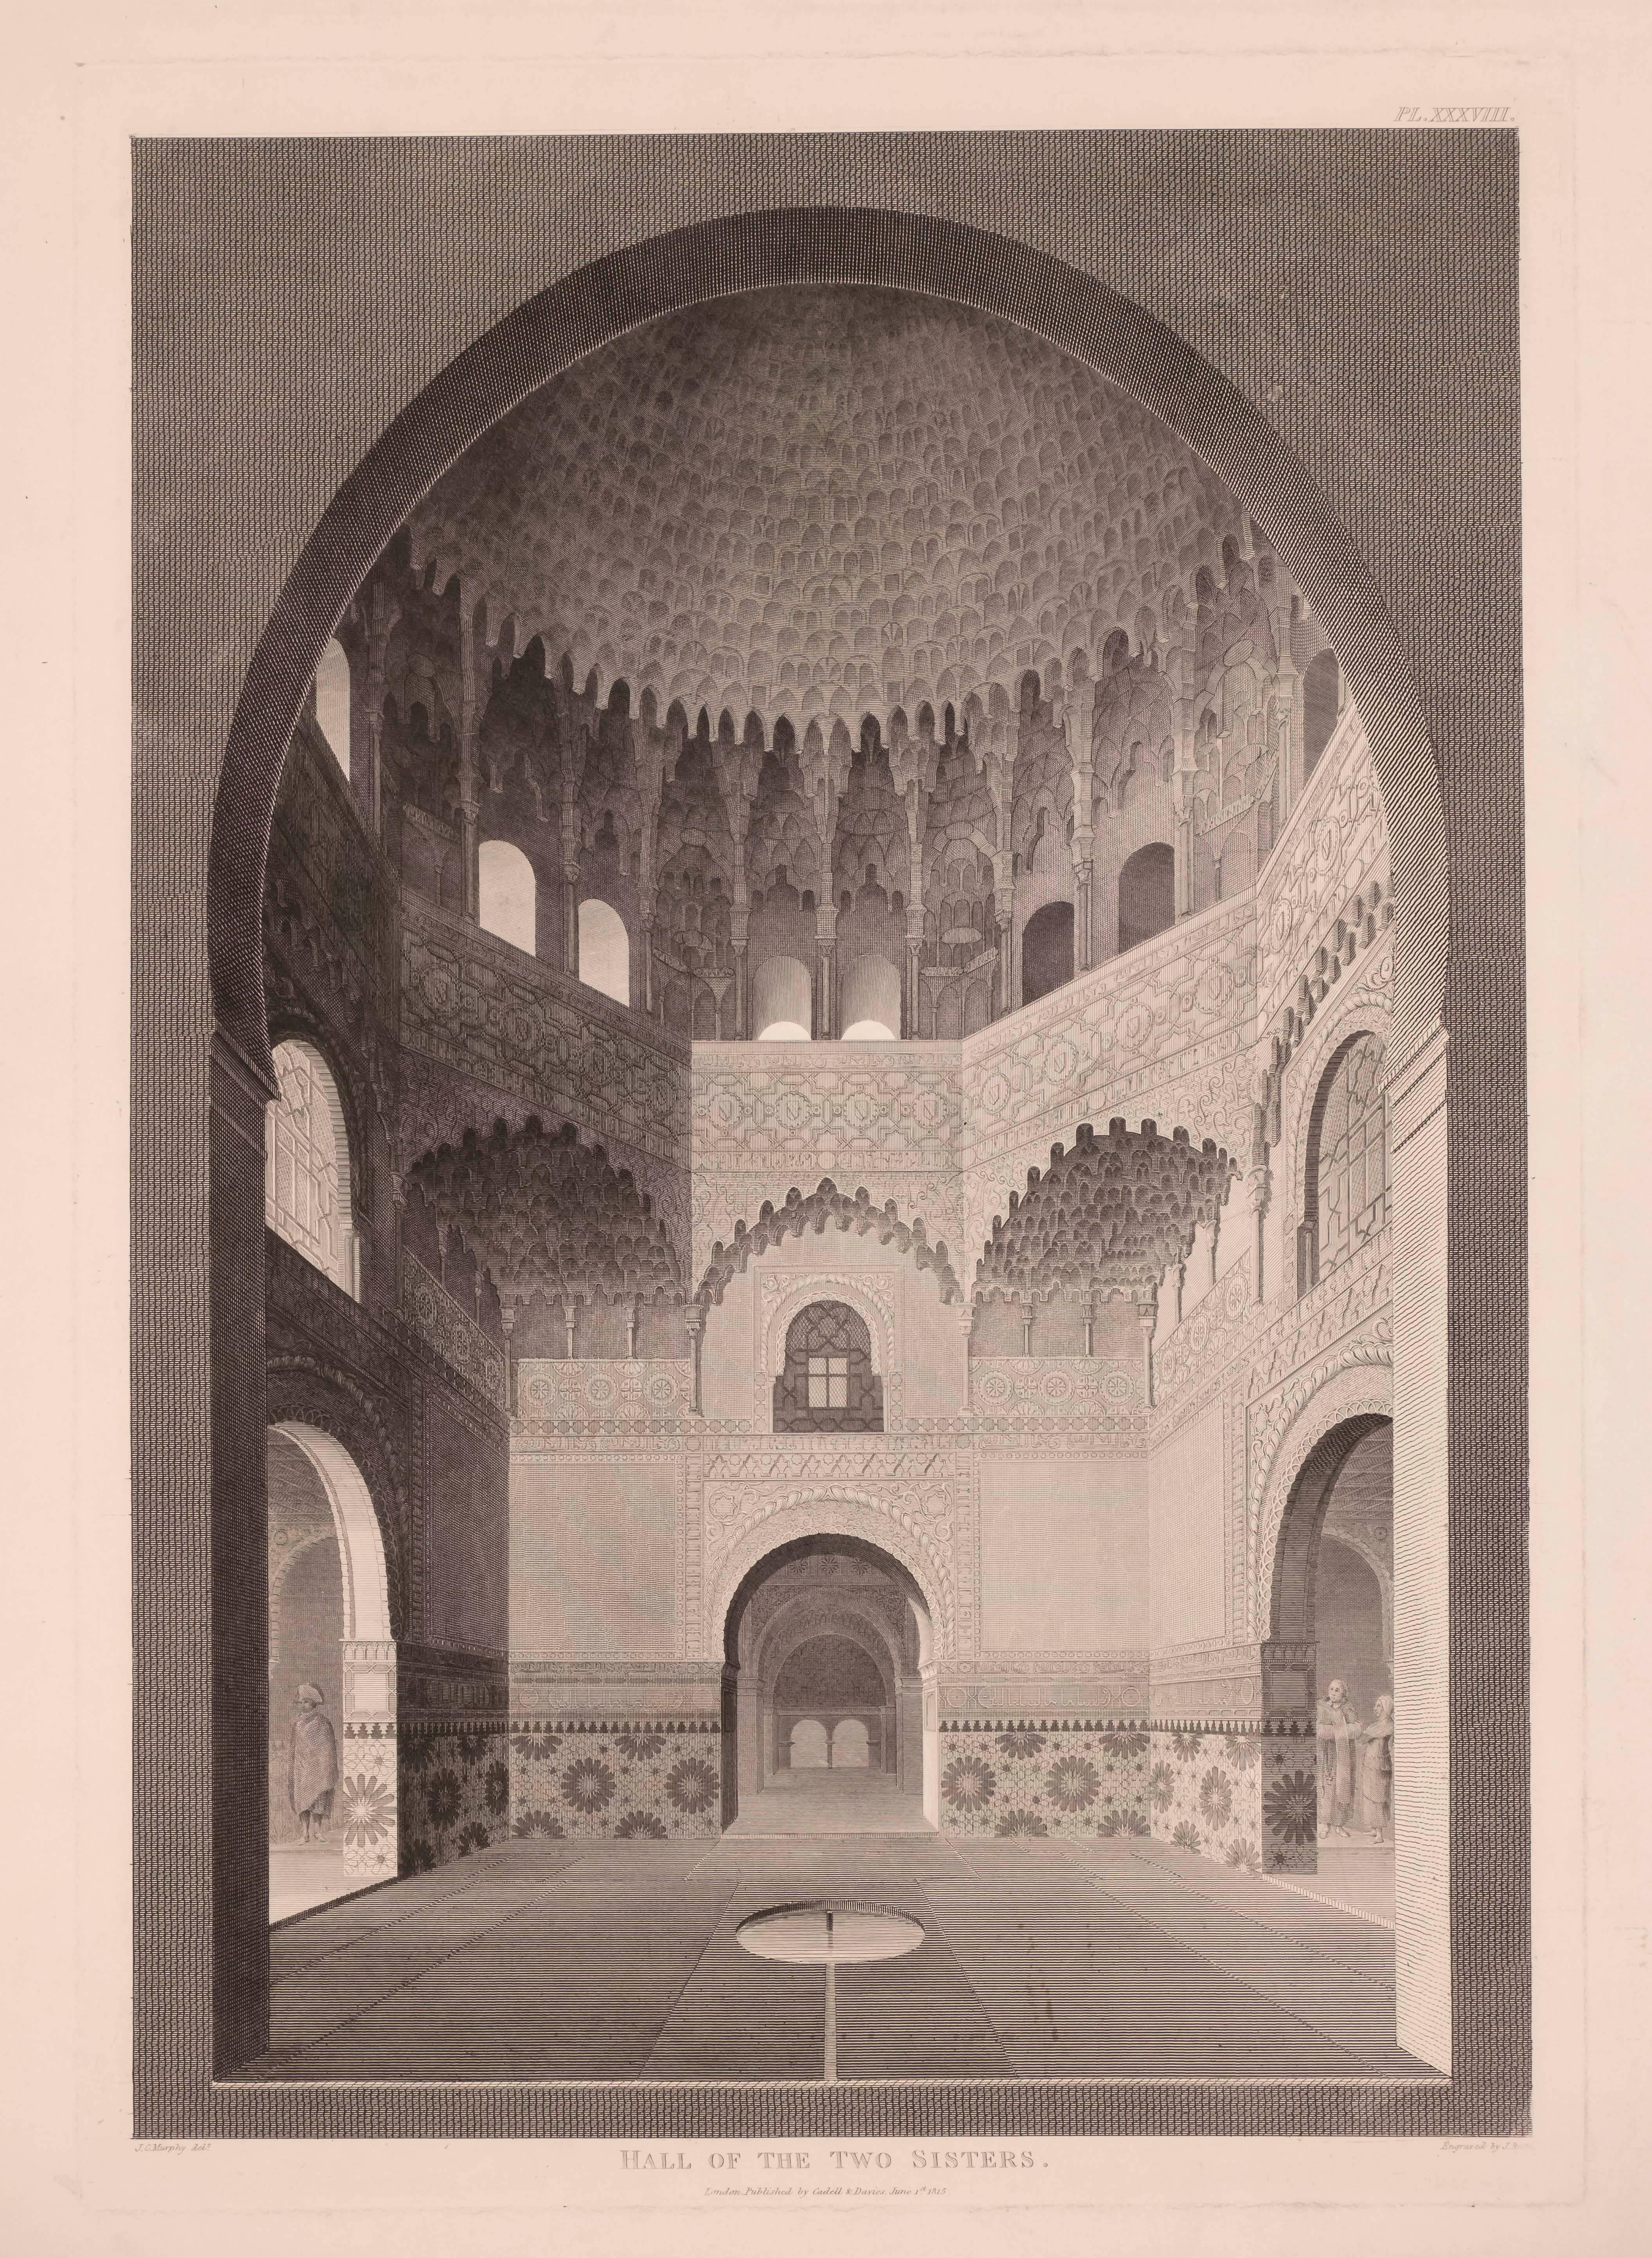 J. C. Murphy Interior Print - Hall of the Two Sisters